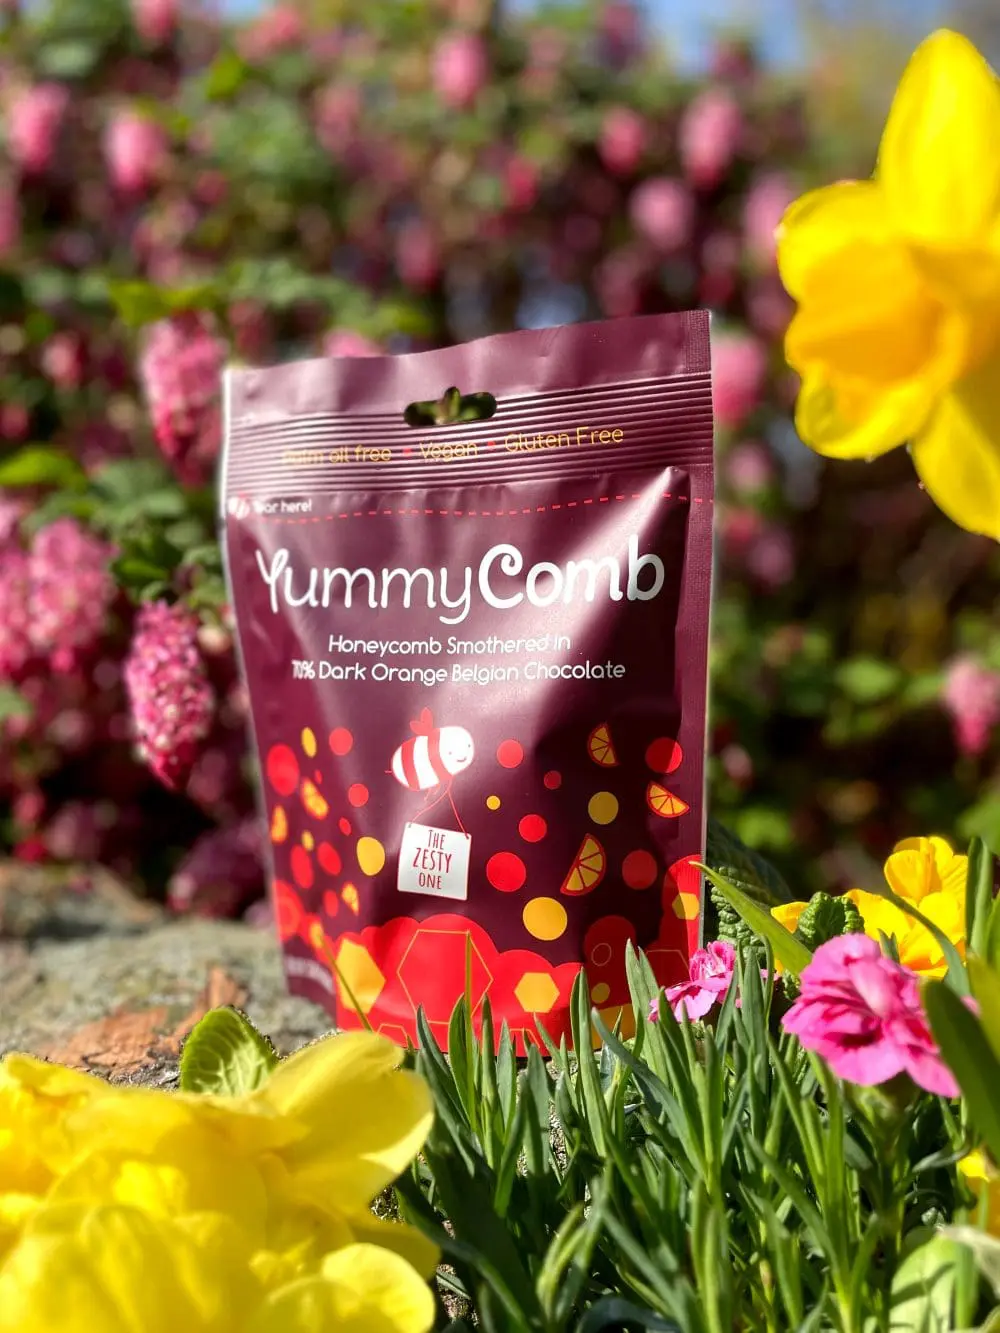 Yummcomb Dark Orange Belgian chocolate covered honeycomb nuggets in a sharing pouch bags 100g in a spring garden